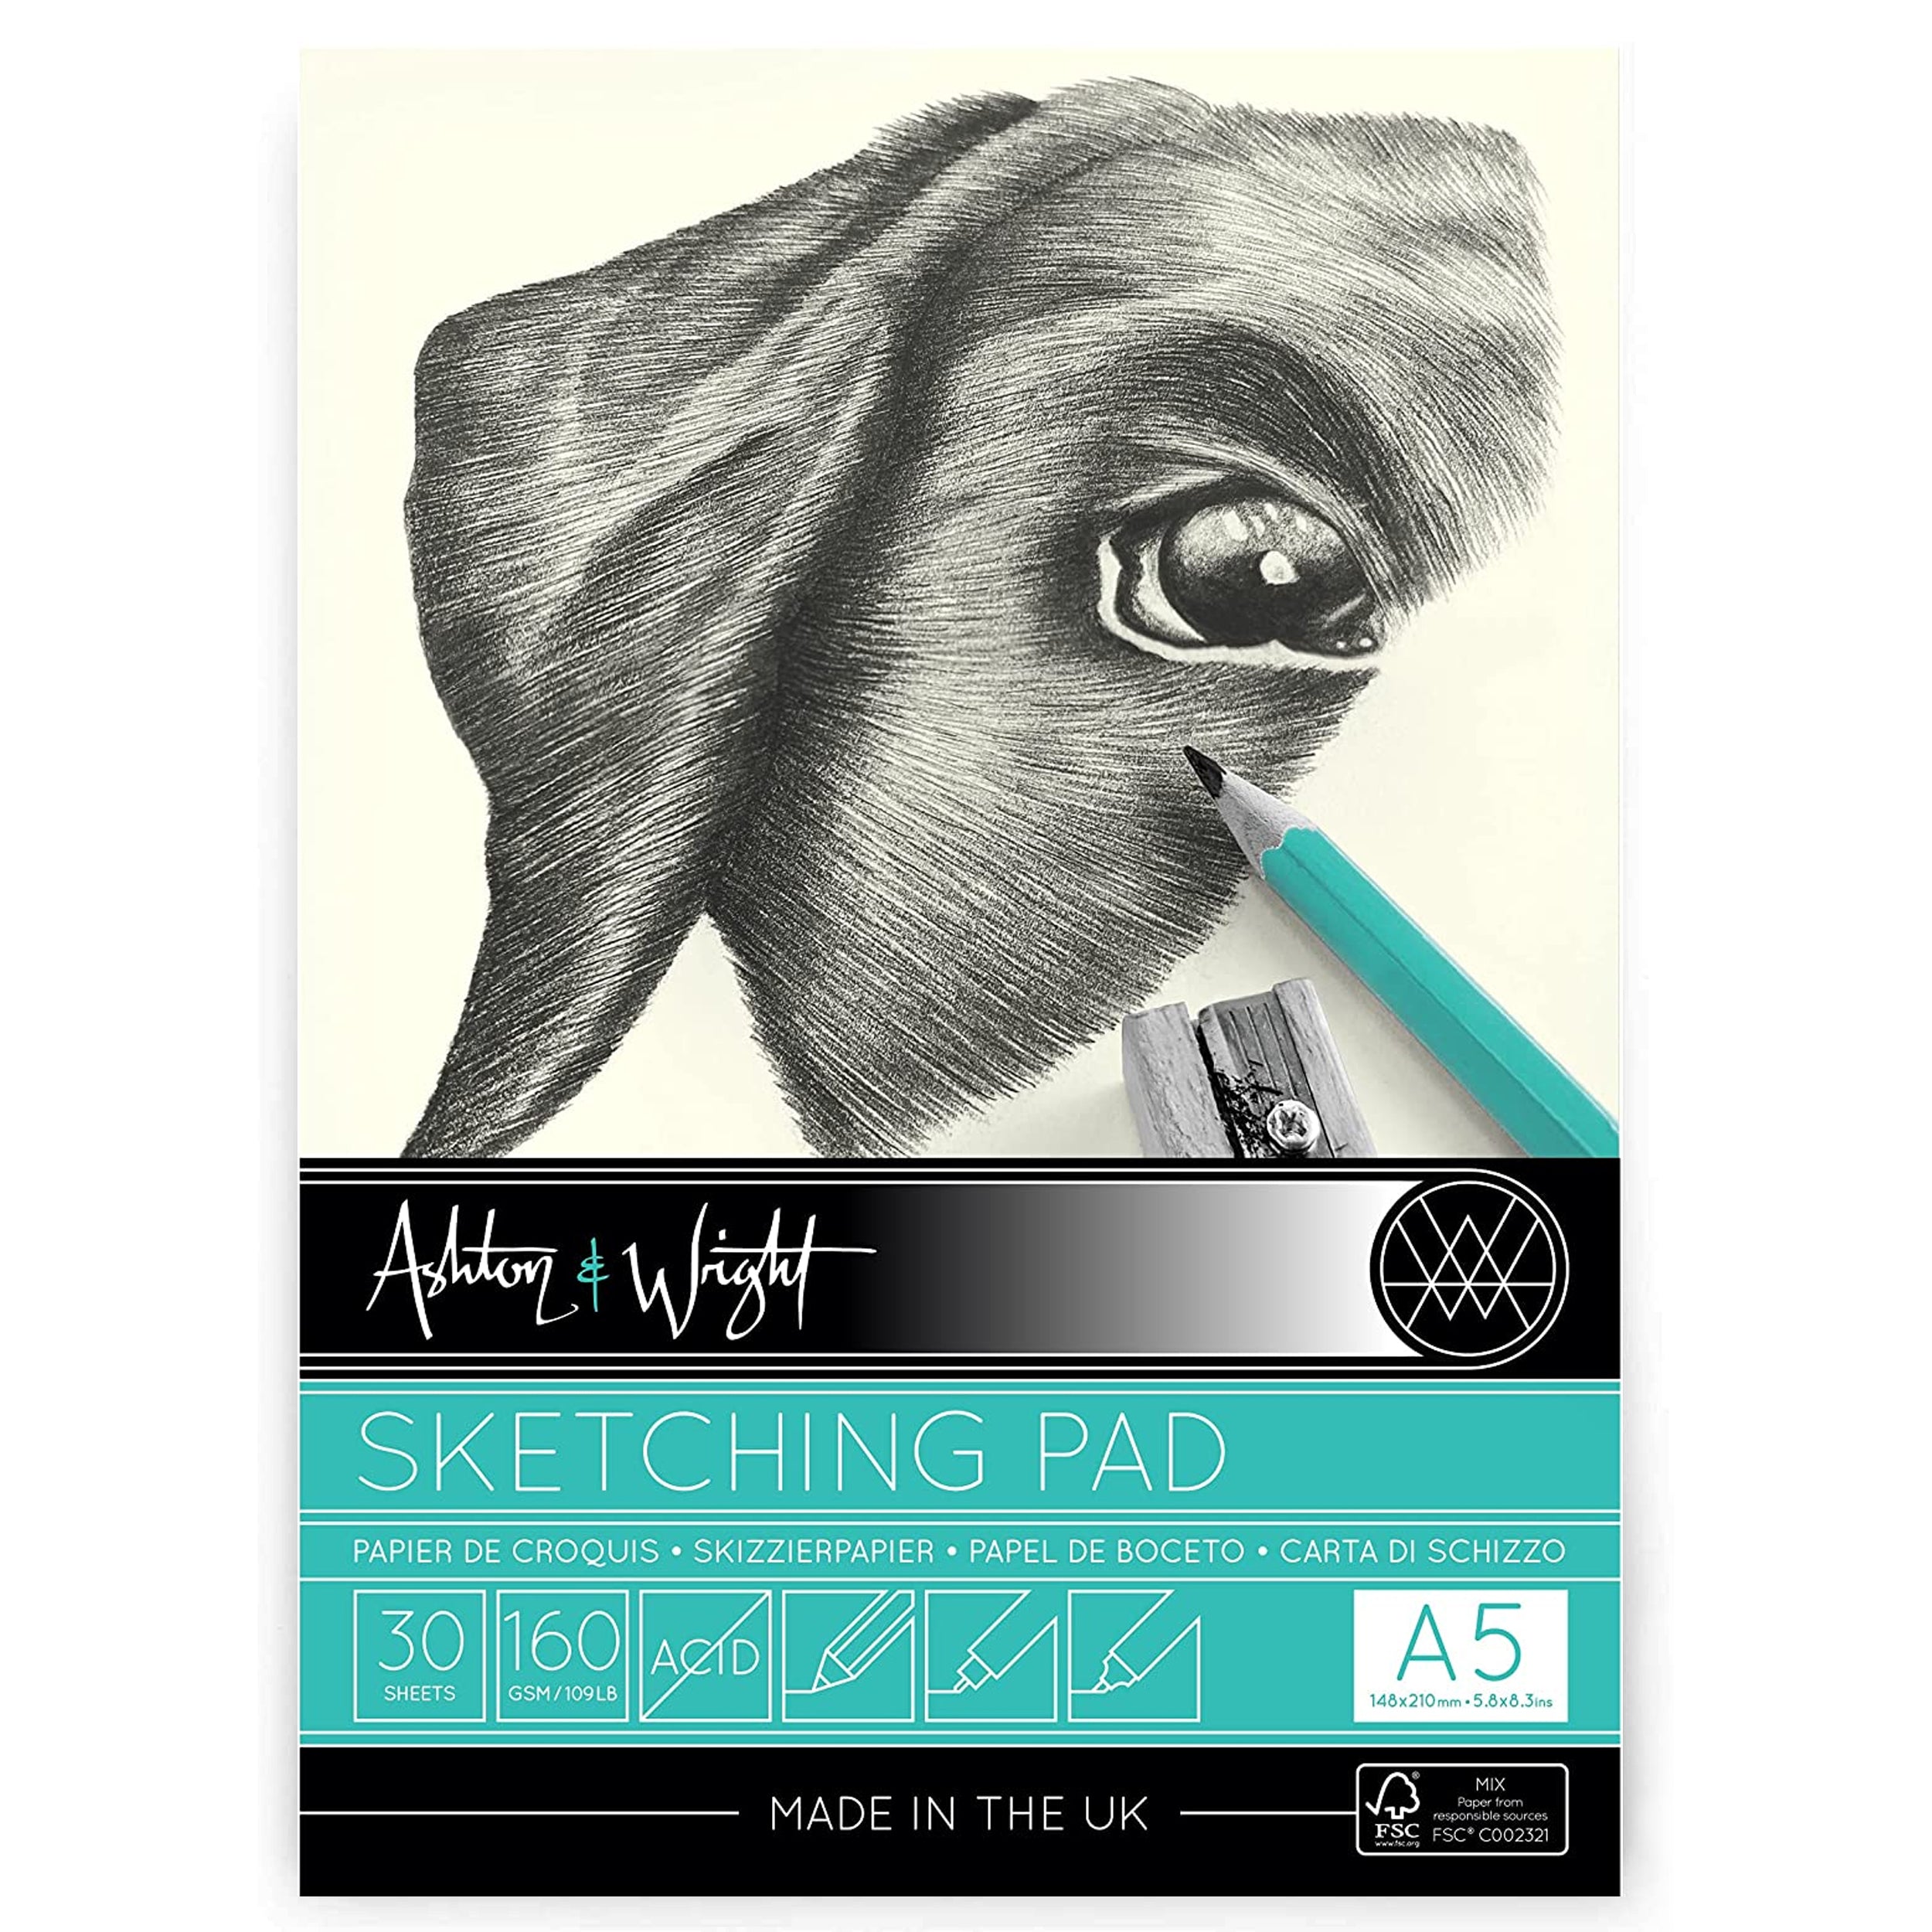 A5 Classic Ivory Sketching Pad